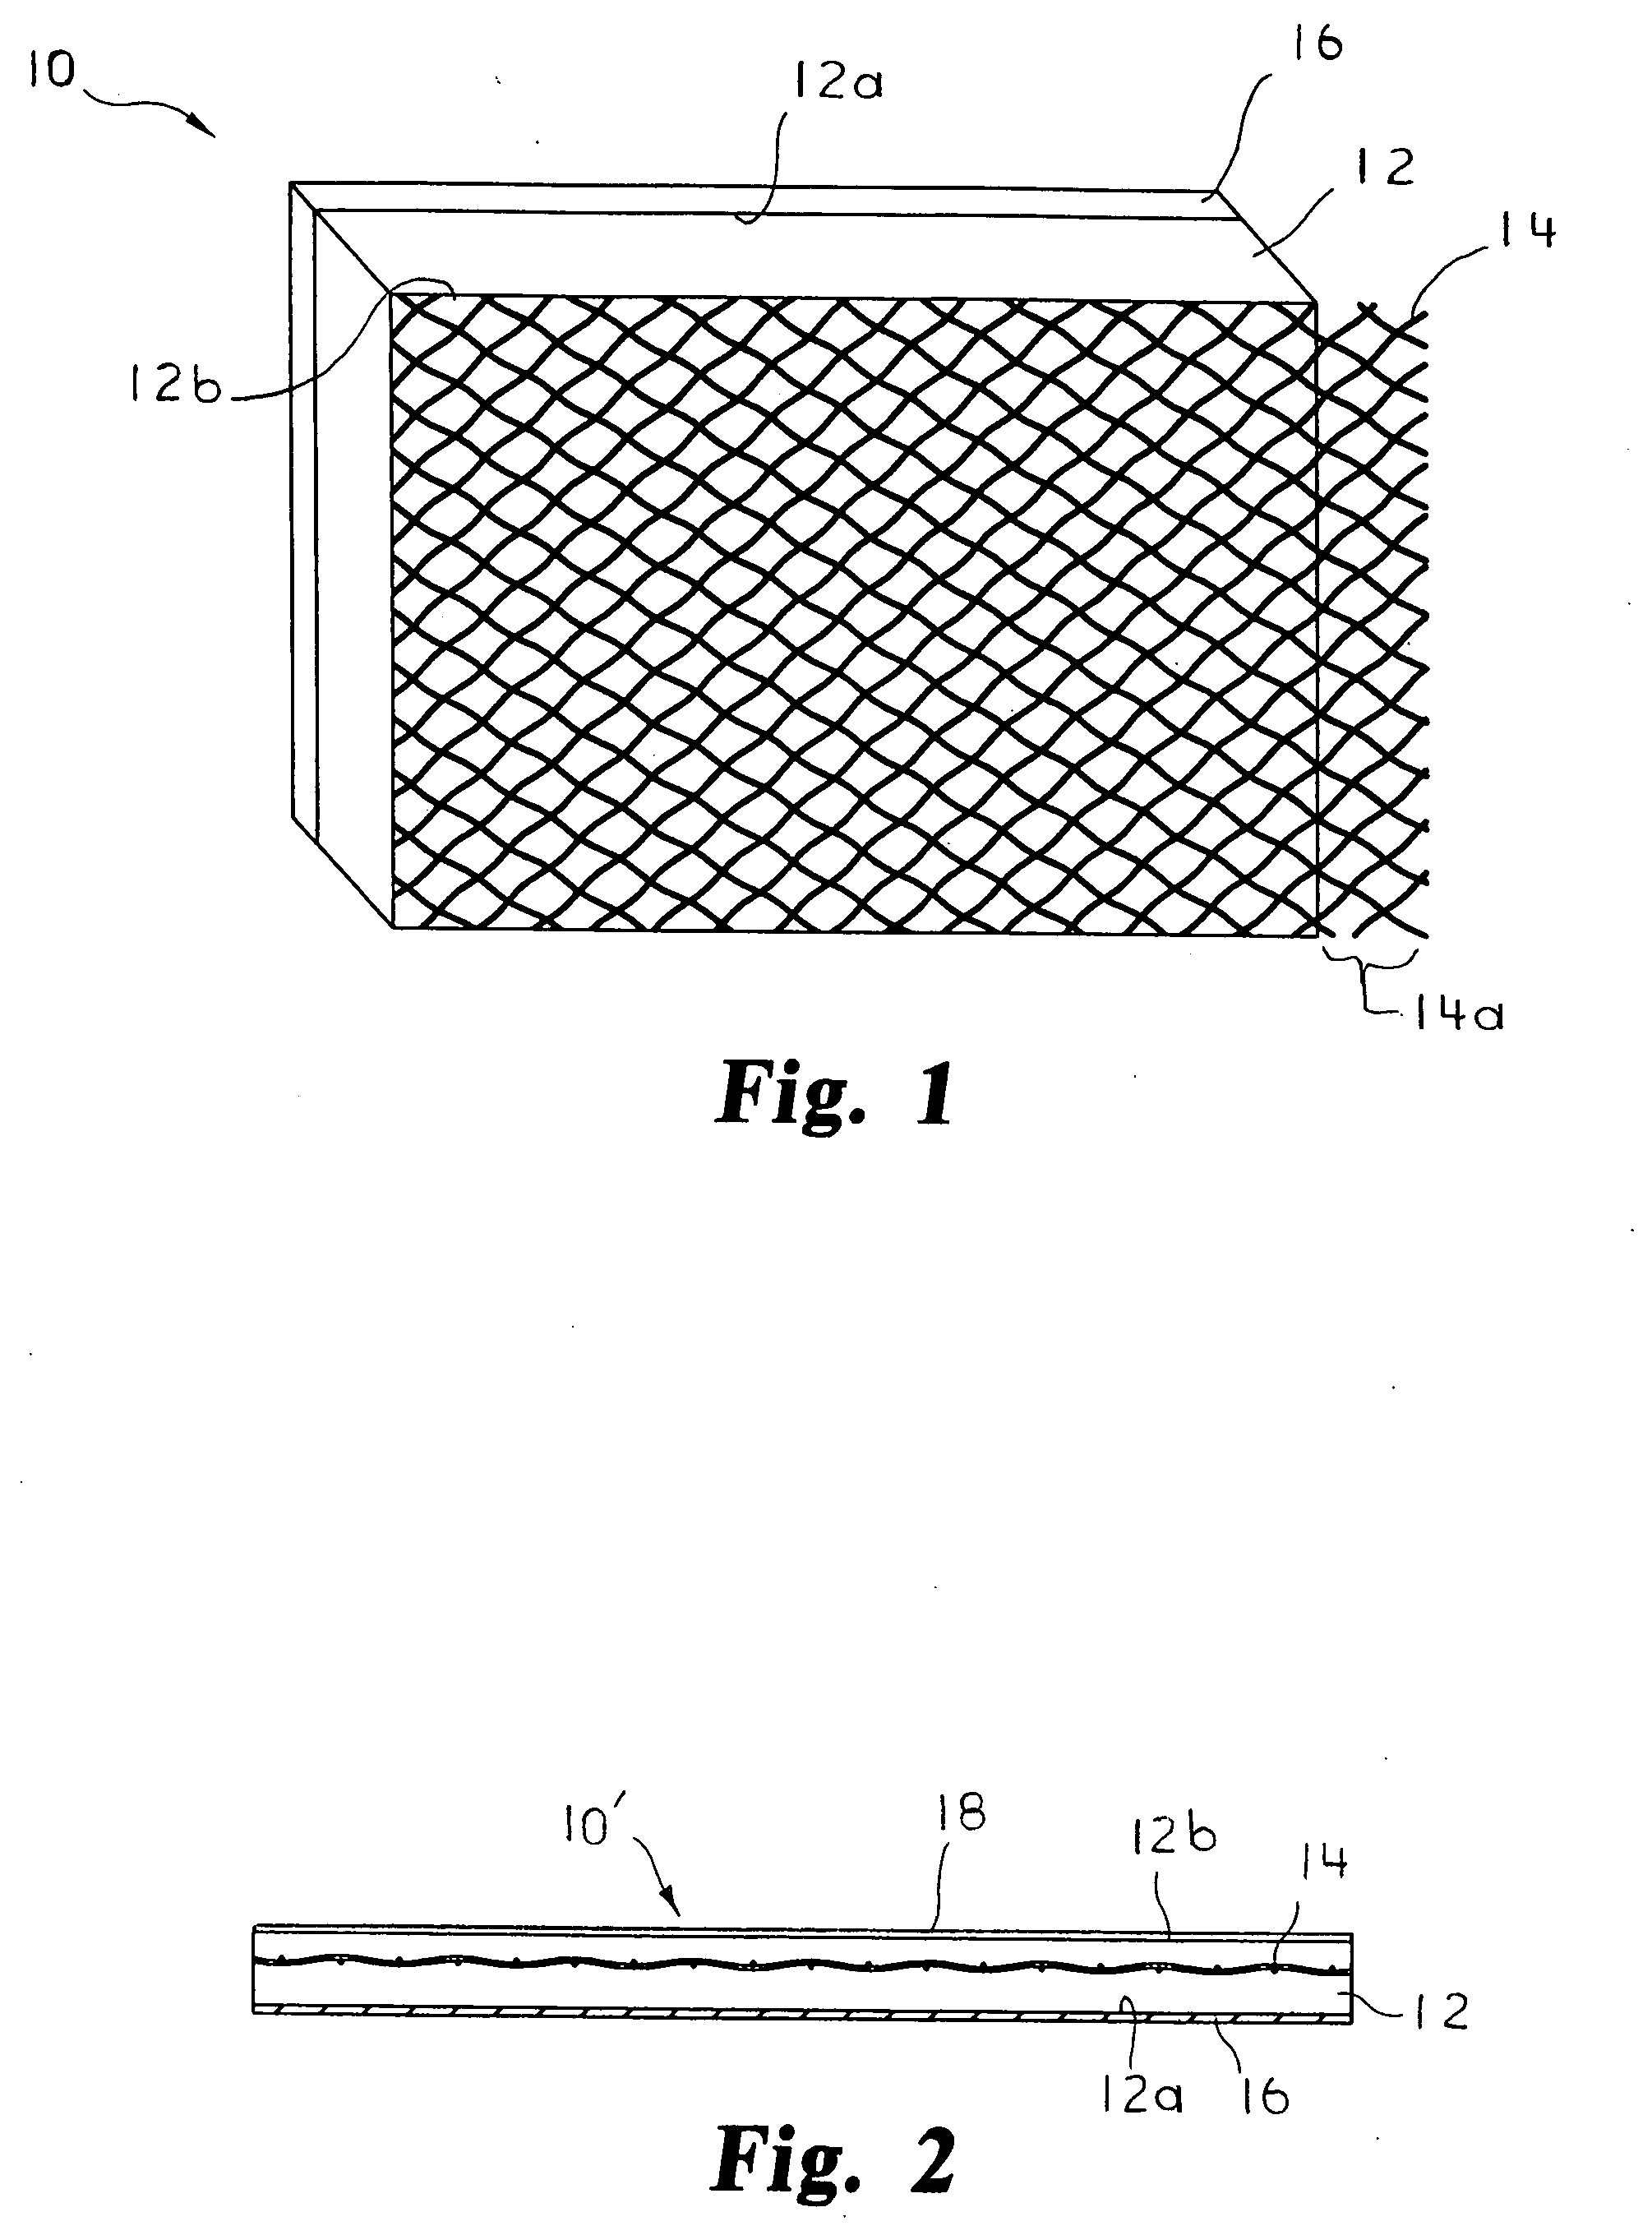 Adhesive attachment and removal device